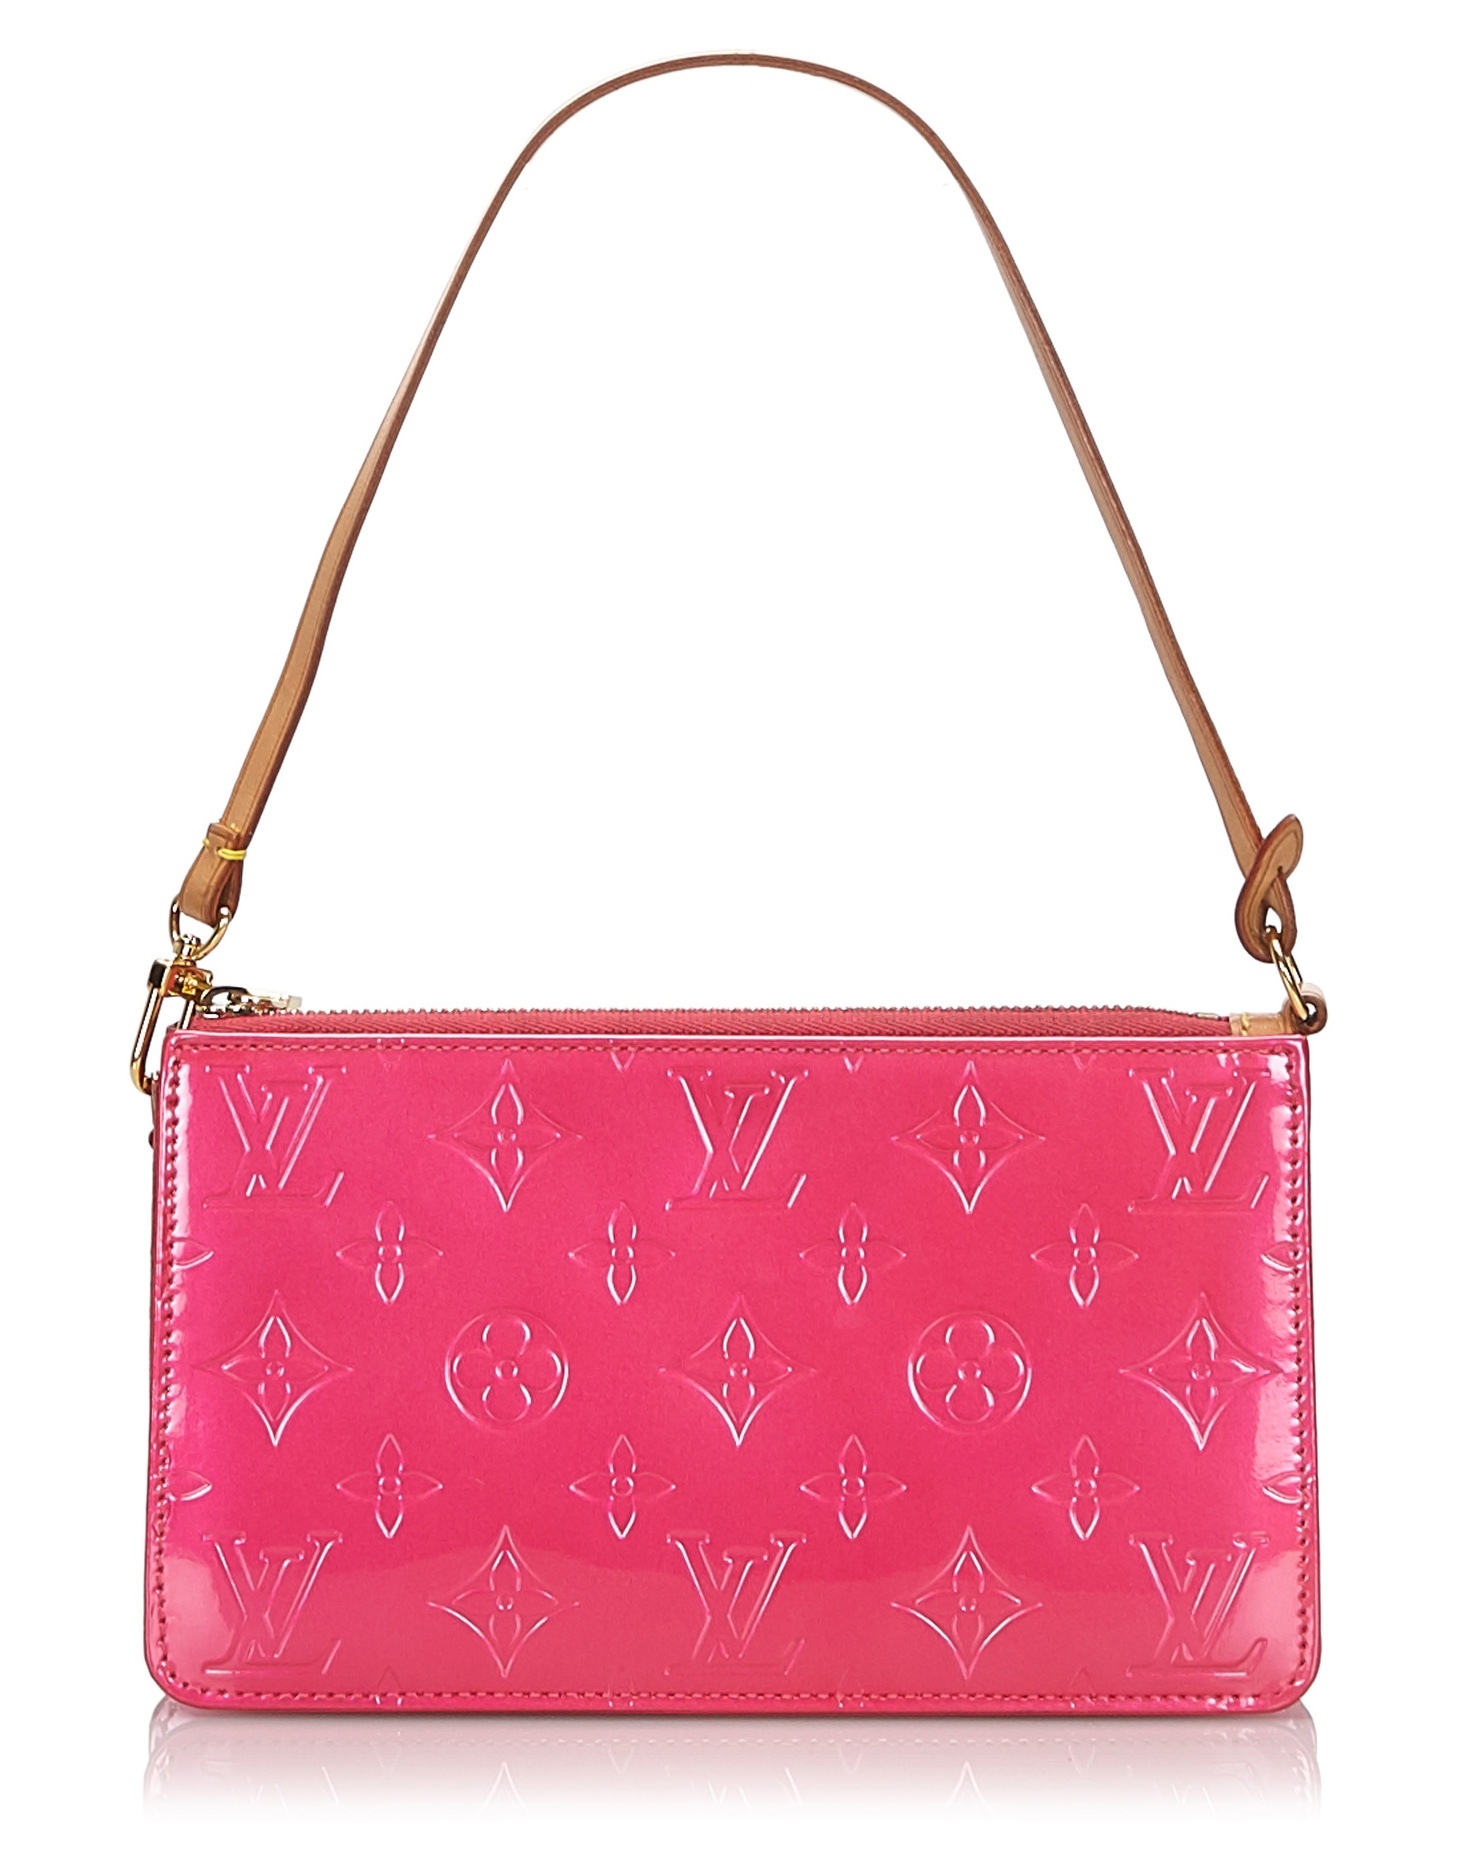 louis vuitton purse pink and white